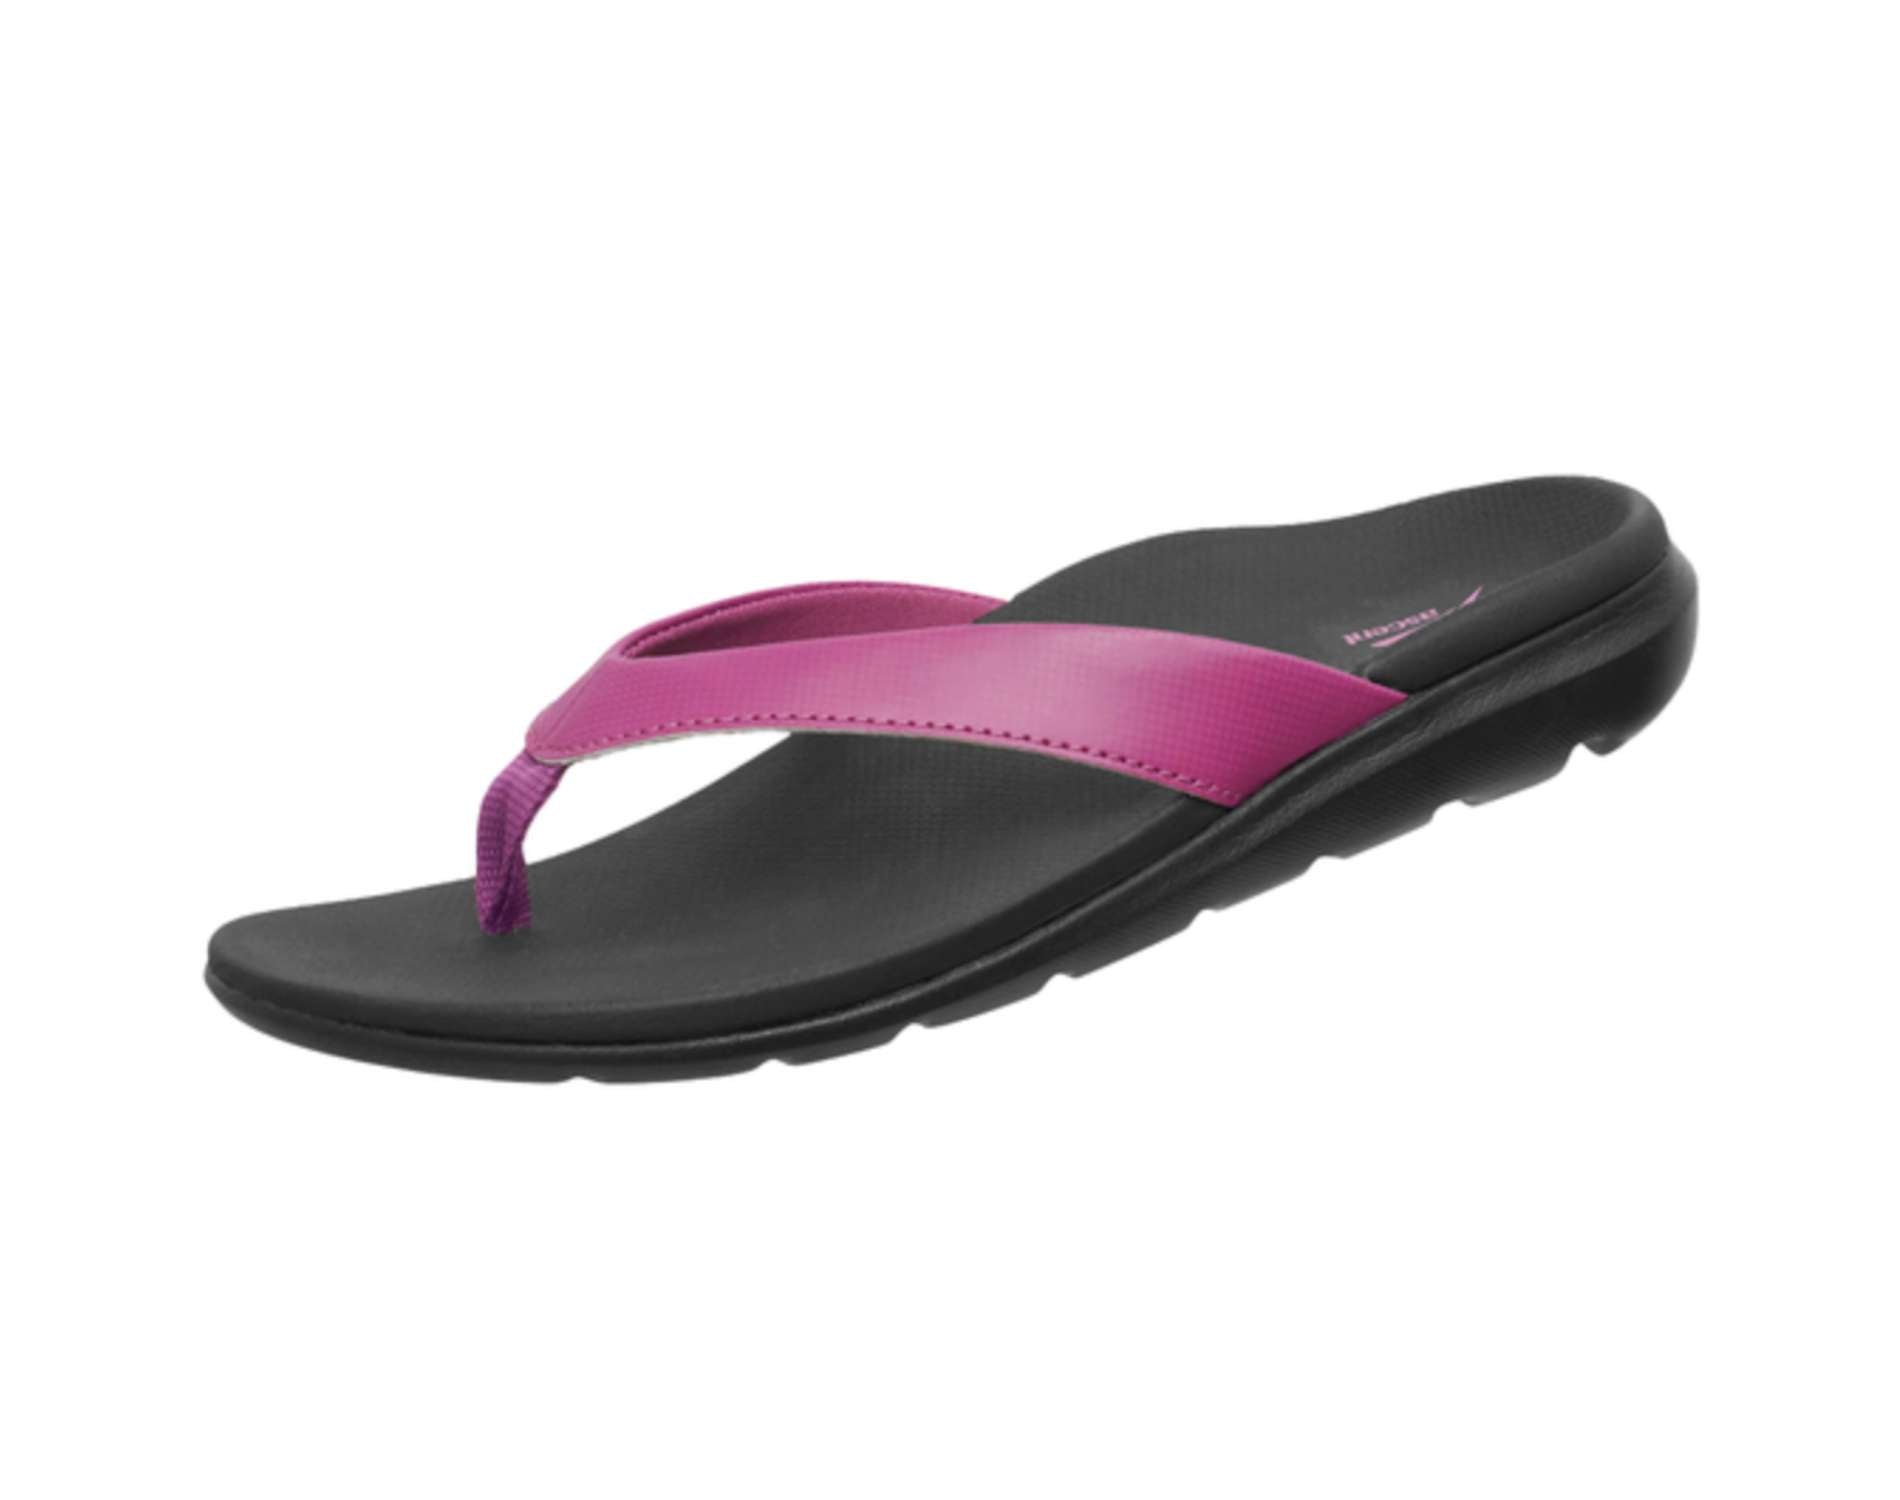 Ascent's Groove sandals for women in fuchsia colour